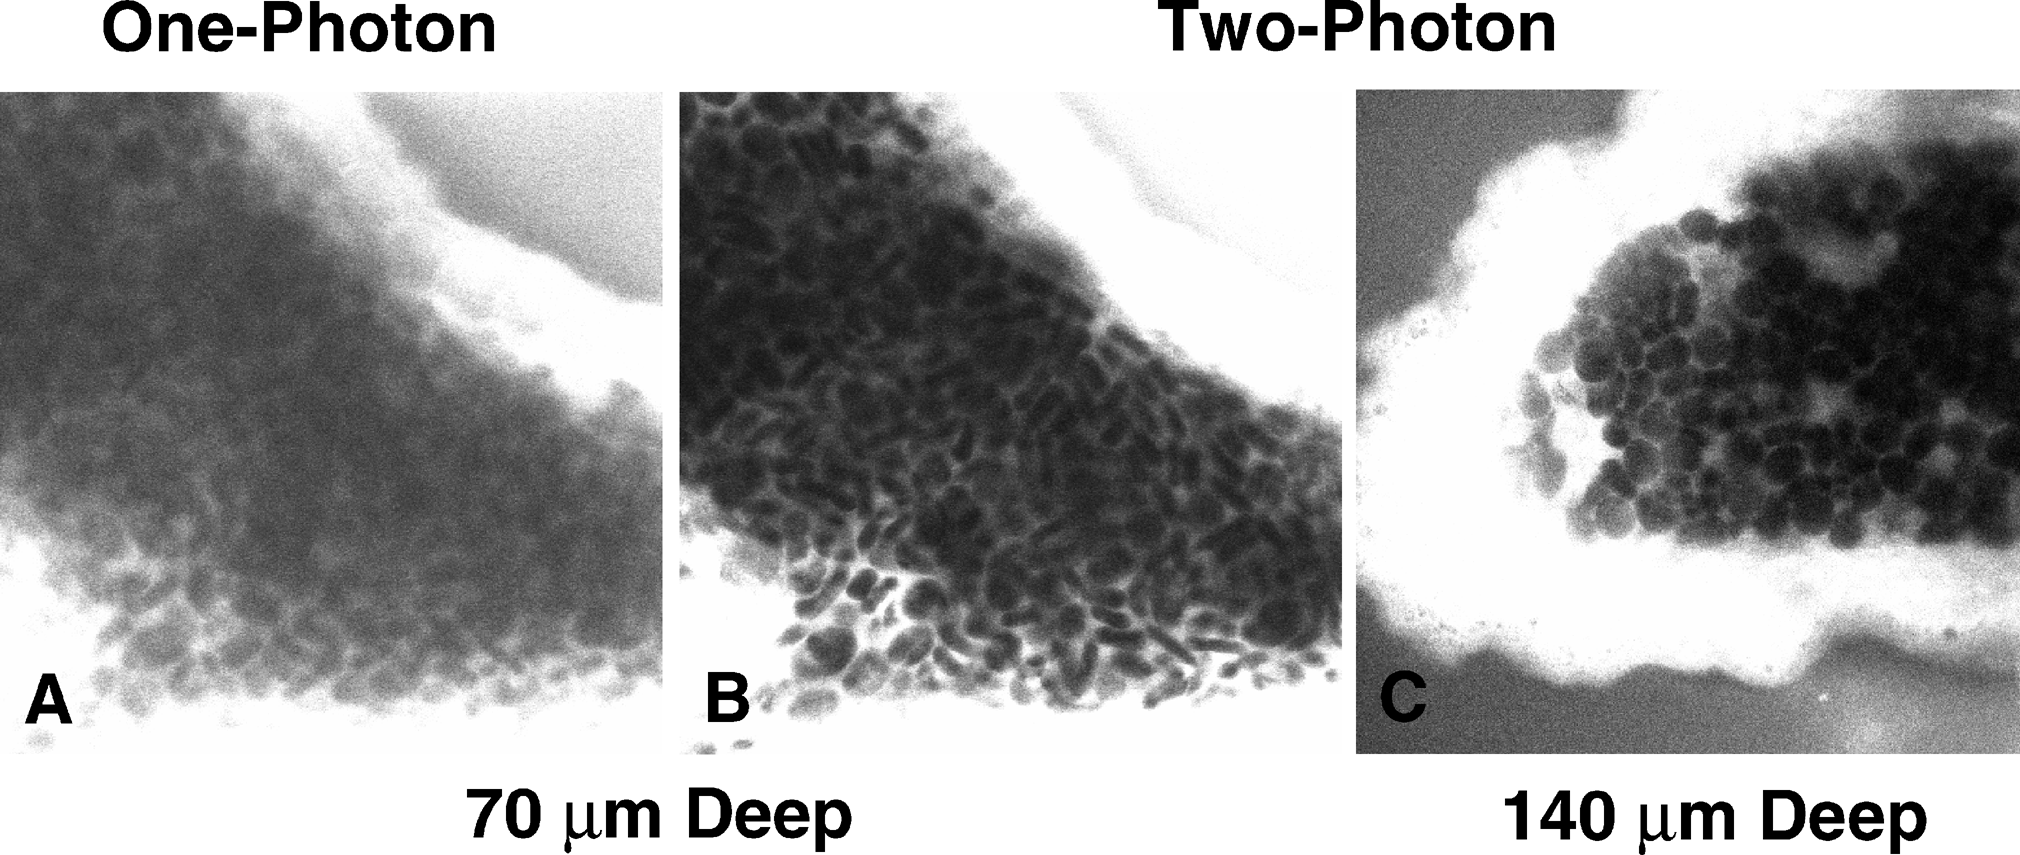 Example of imaging depth capabilities in one-photon and two-photon imaging techniques.